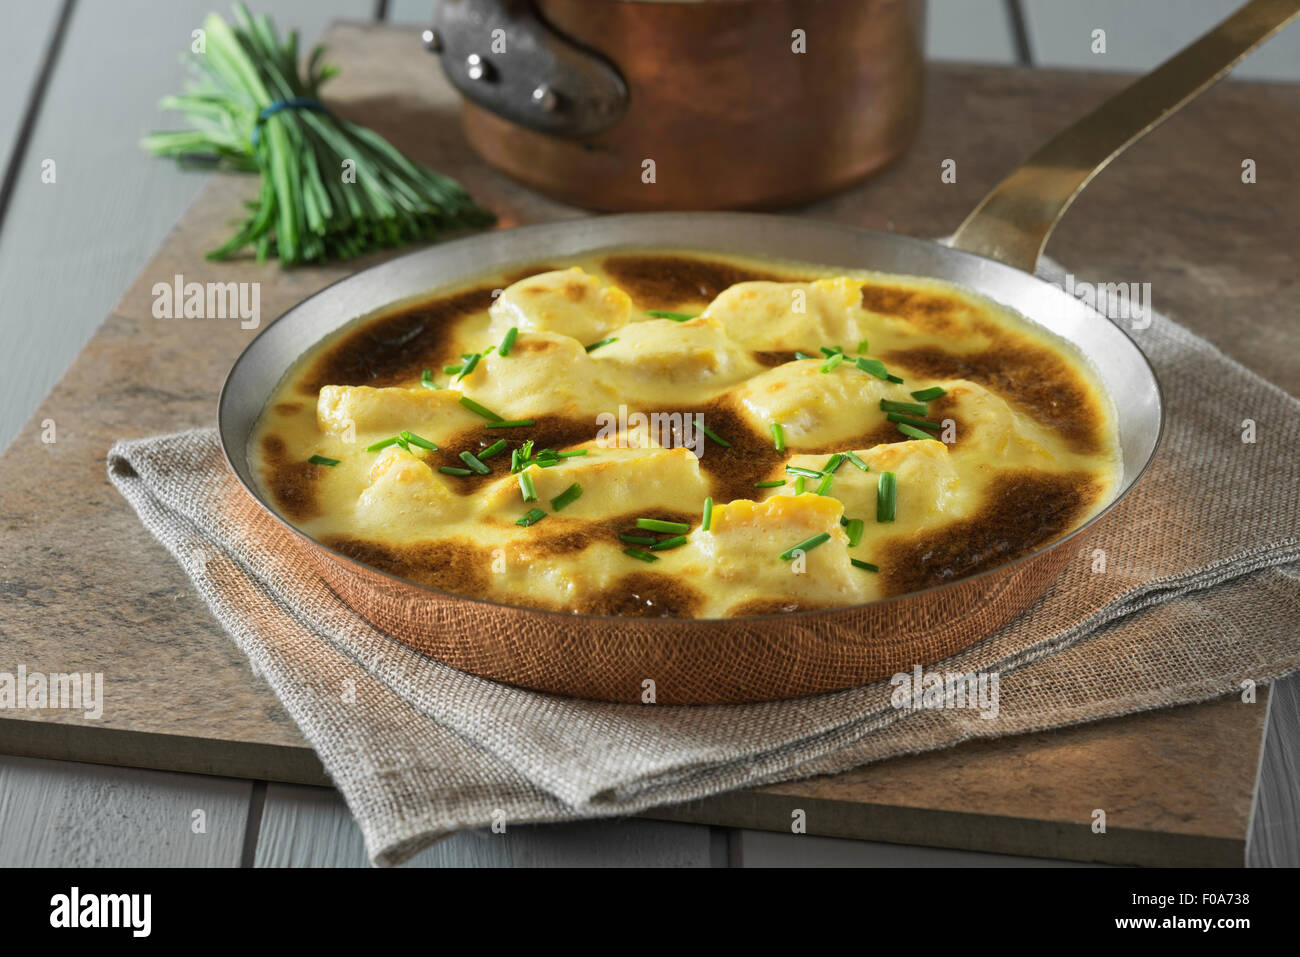 Omelette Arnold Bennett with smoked haddock. Stock Photo